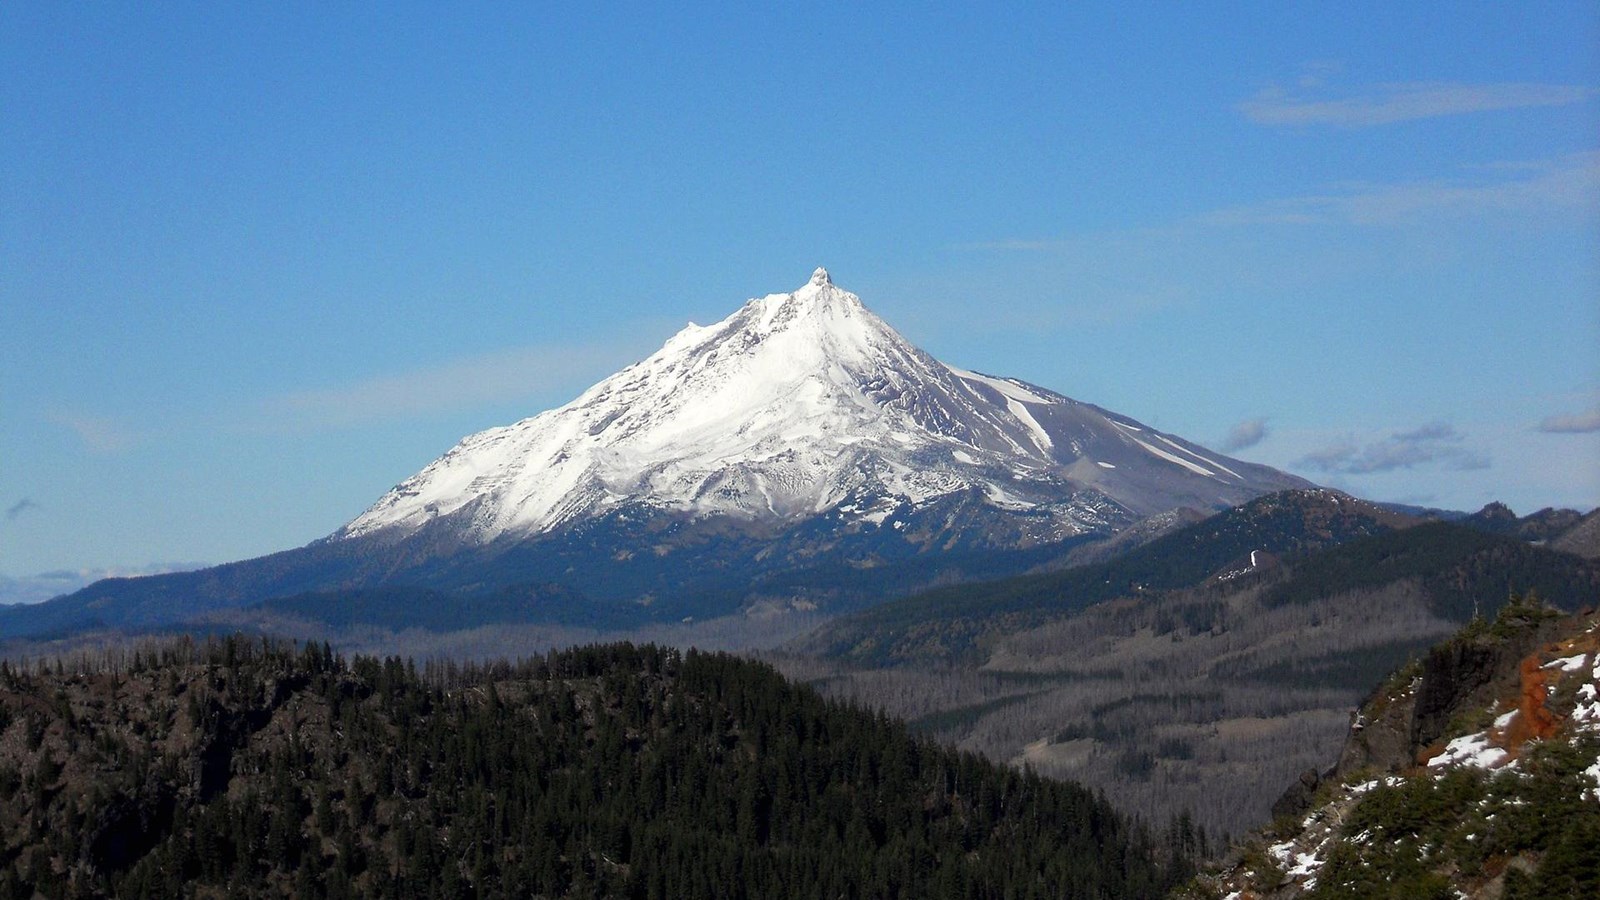 Mount Jefferson’s white peak stands tall against a bright blue sky, with tree-covered hills in the f